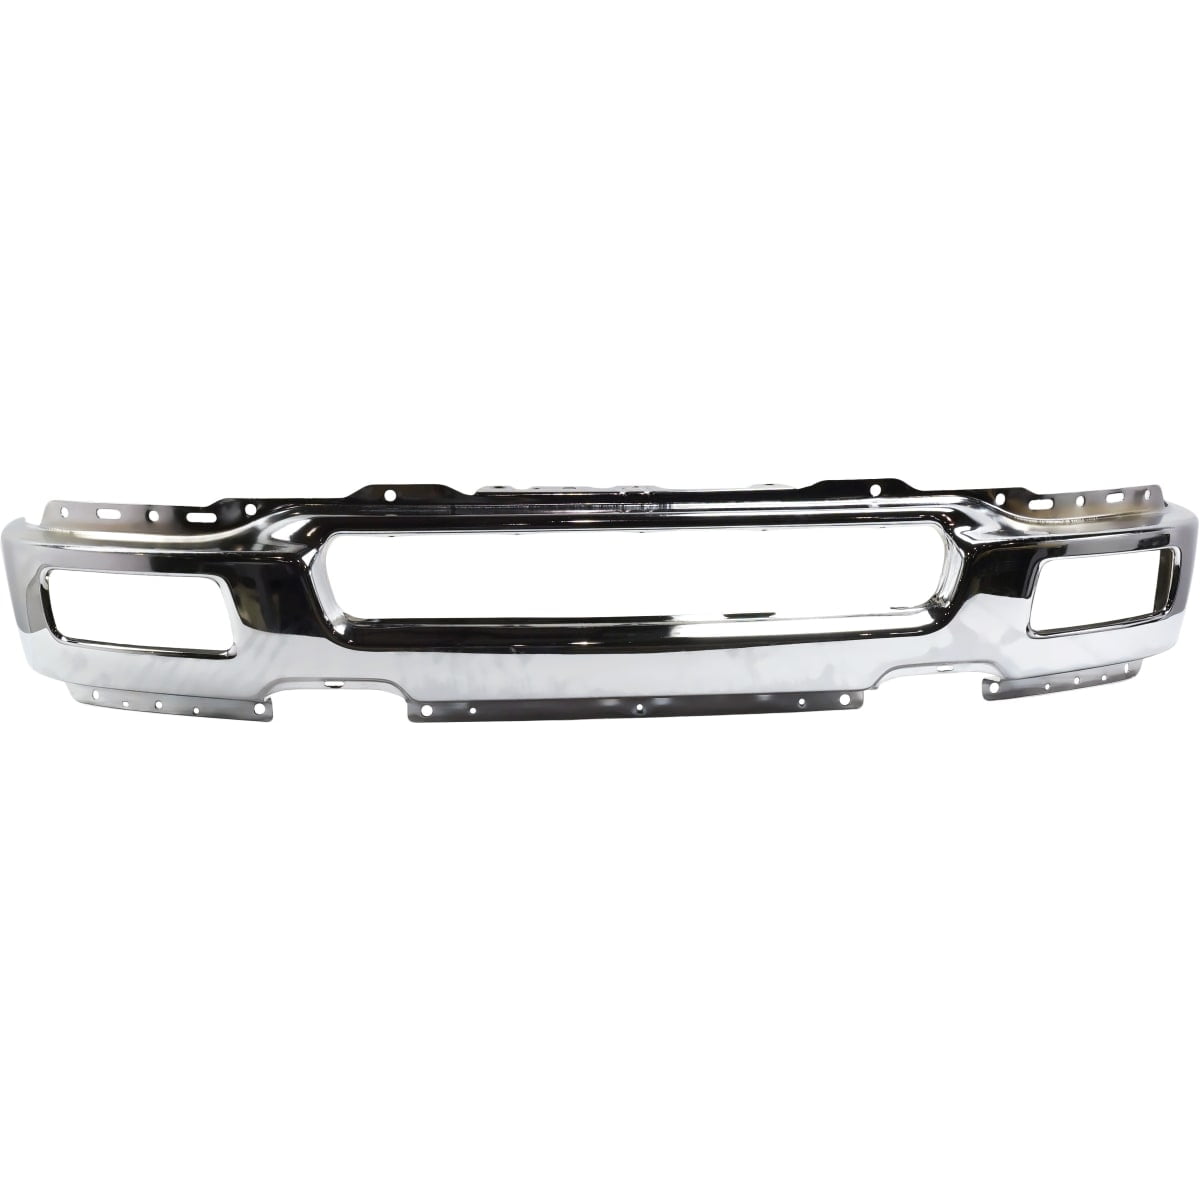 Front Bumper for 2004-2006 Ford F-150 Chrome OE Replacement